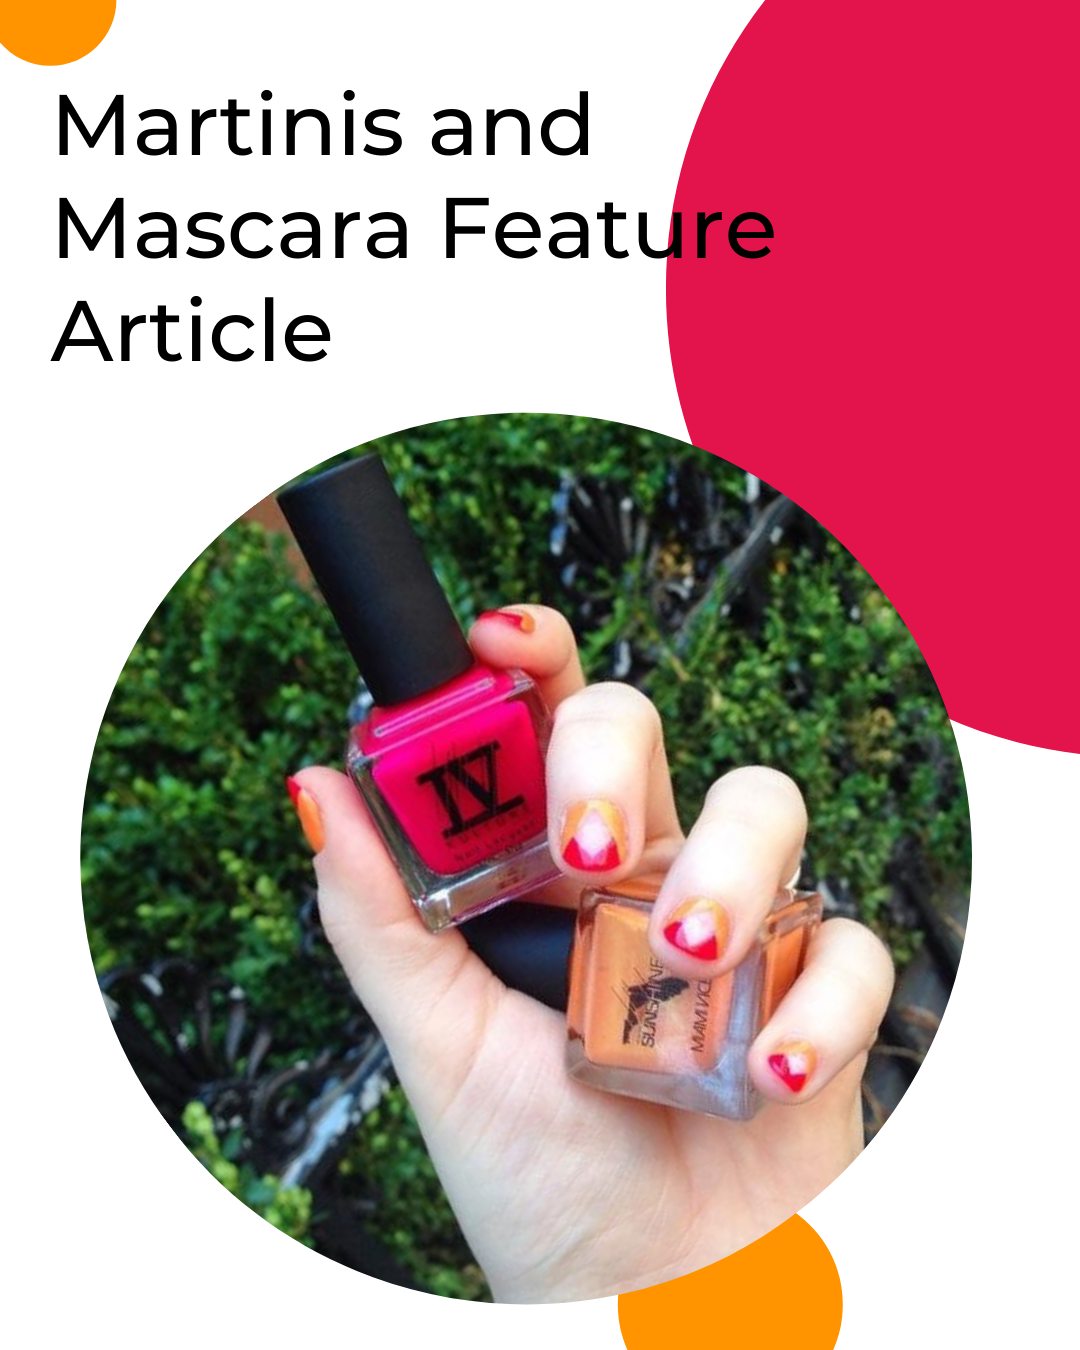 Martinis and Mascara Feature Article